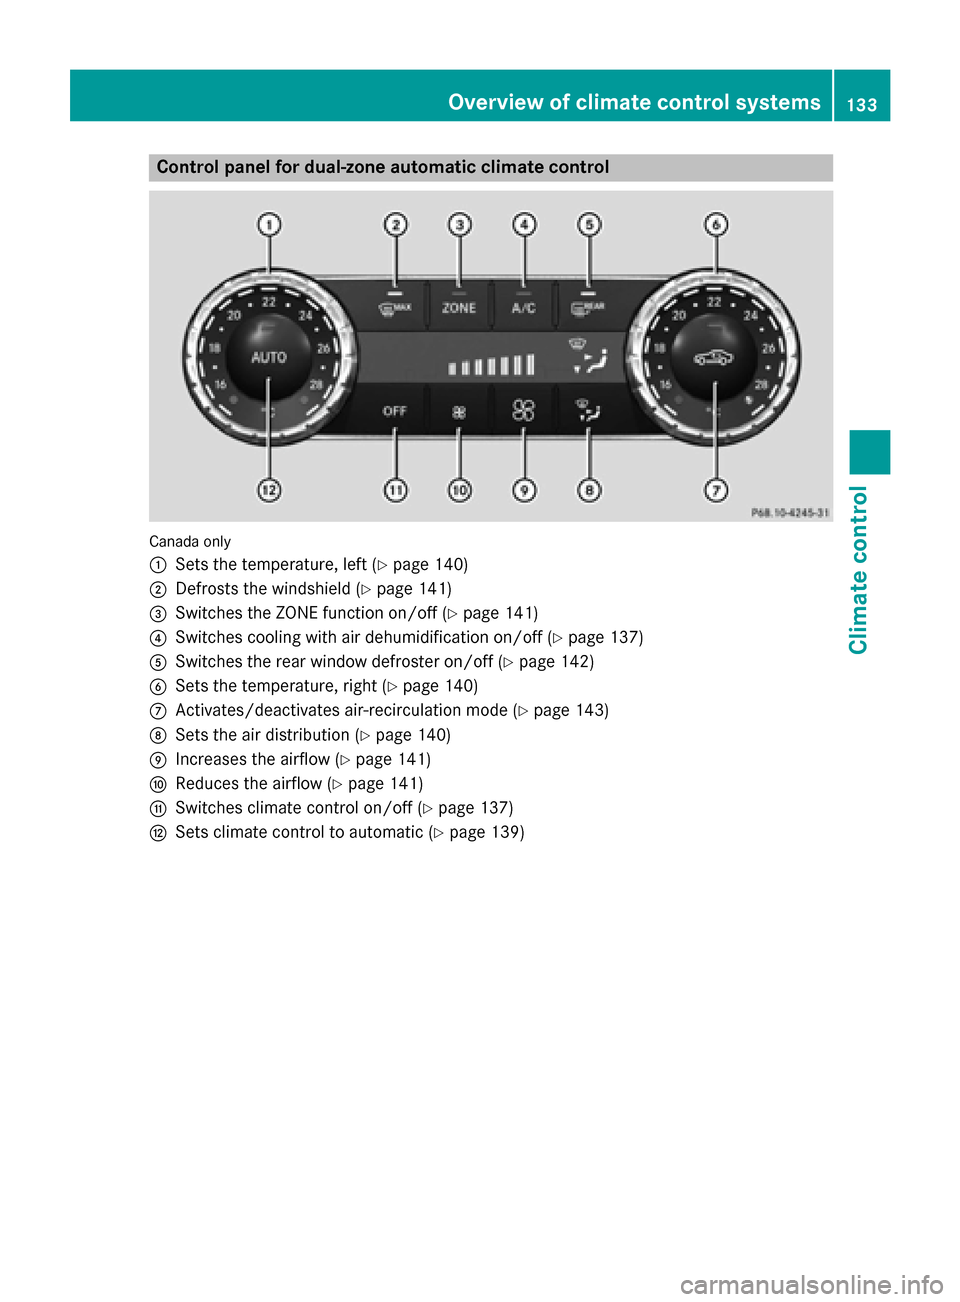 MERCEDES-BENZ GLK-Class 2015 X204 Owners Manual Control panel for dual-zone automatic climate control
Canada only
0043
Sets the temperature, left (Y page 140)
0044 Defrosts the windshield (Y page 141)
0087 Switches the ZONE function on/off (Y page 